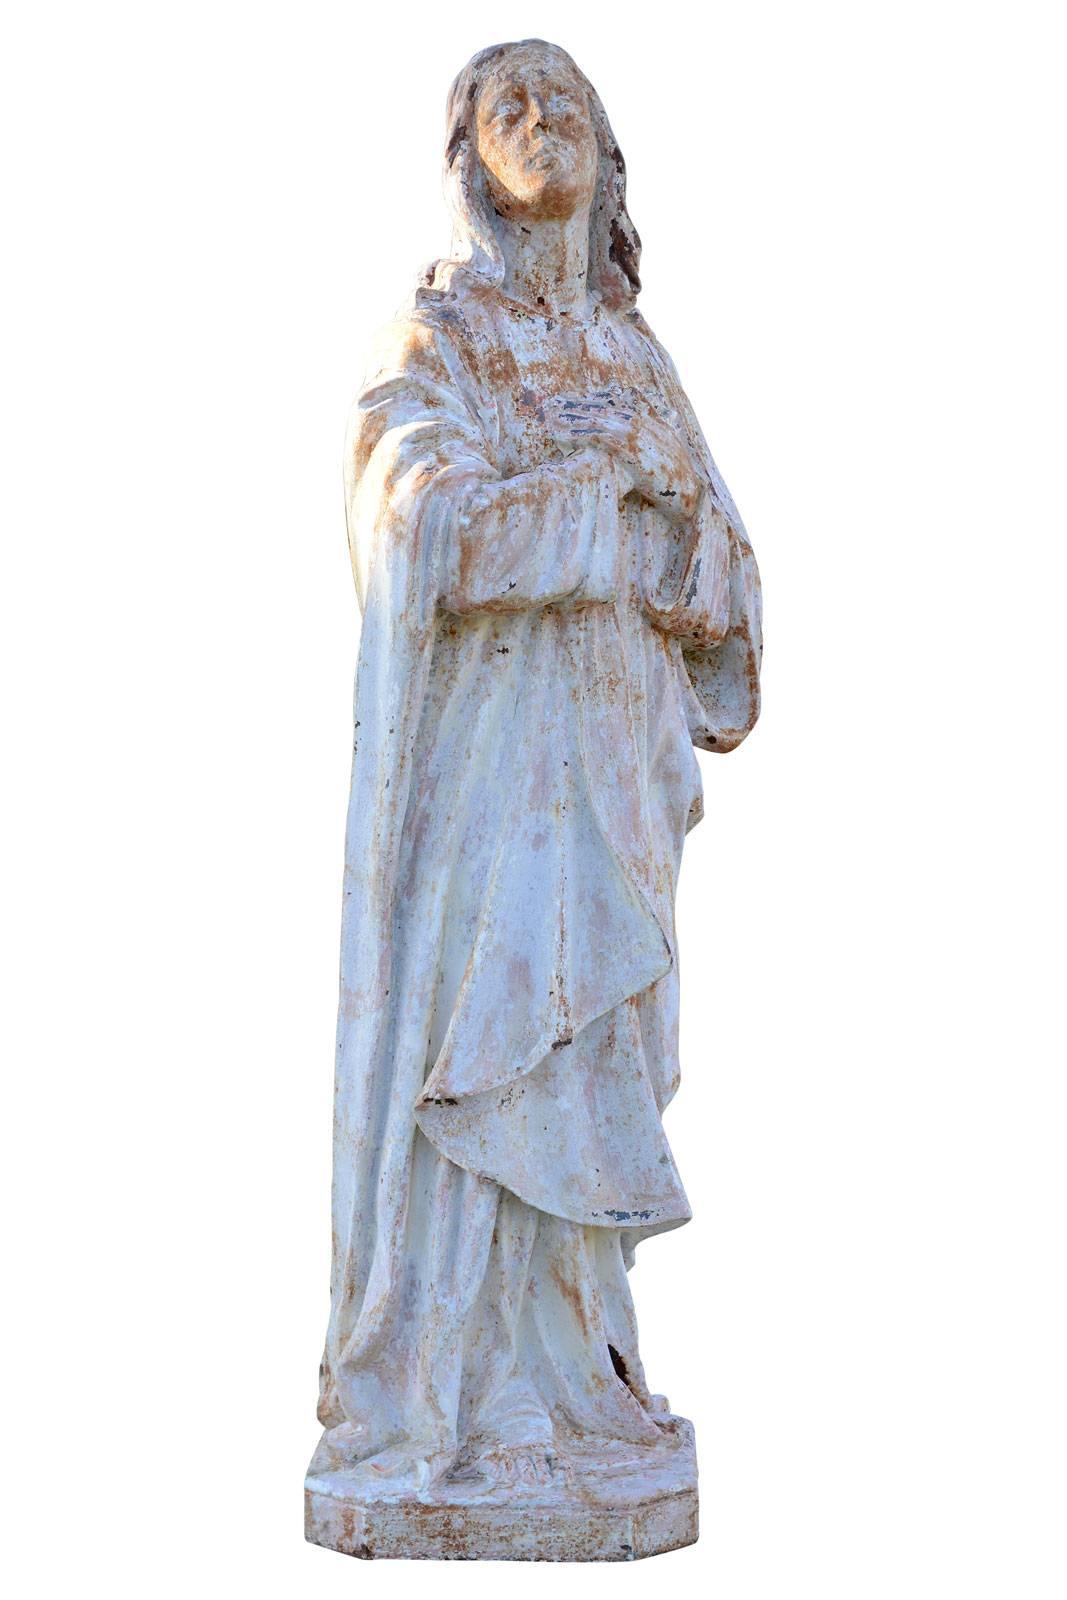 Dated 19th century, cast iron statue representing St. Mary Magdalene, who was near the Virgin Mary and St. John at the Crucifixion. This statue, where traces of color are apparent, was to be near a Calvary. Origin : Ancient Dominican nuns' park of